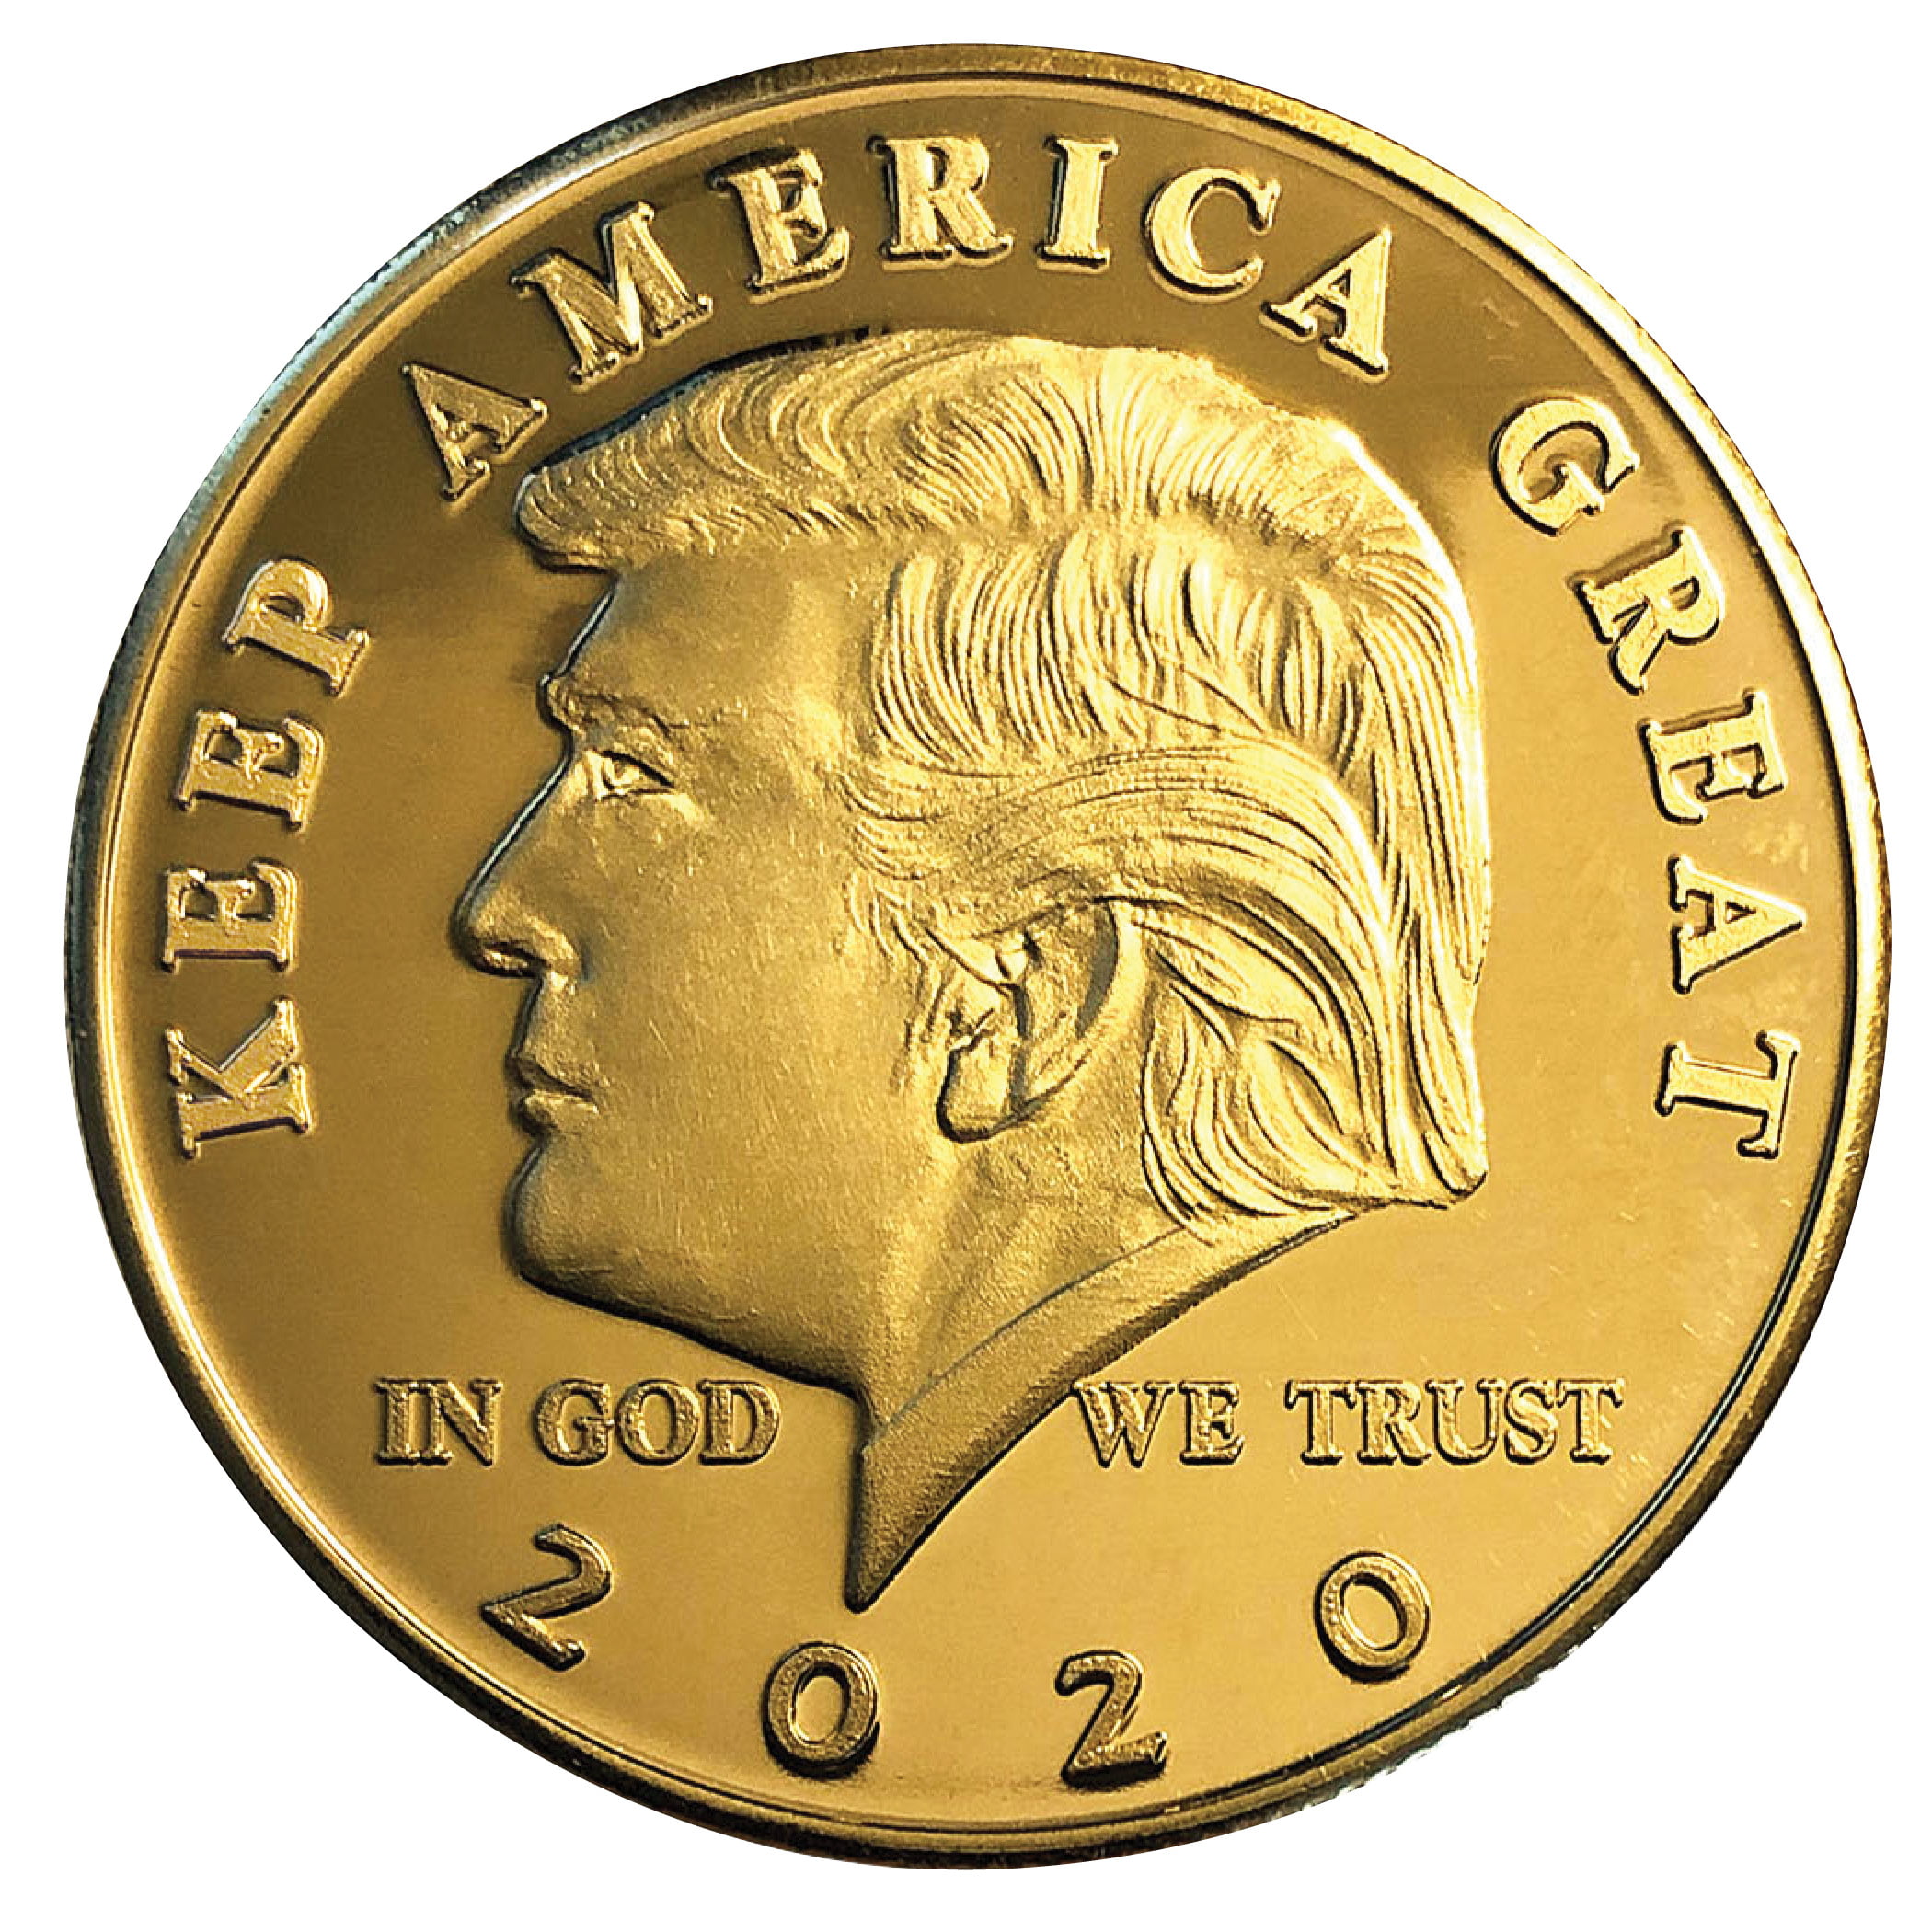 US President Donald Trump 2020 KEEP AMERICA GREAT Silver & Gold Two Tone Coin yu 